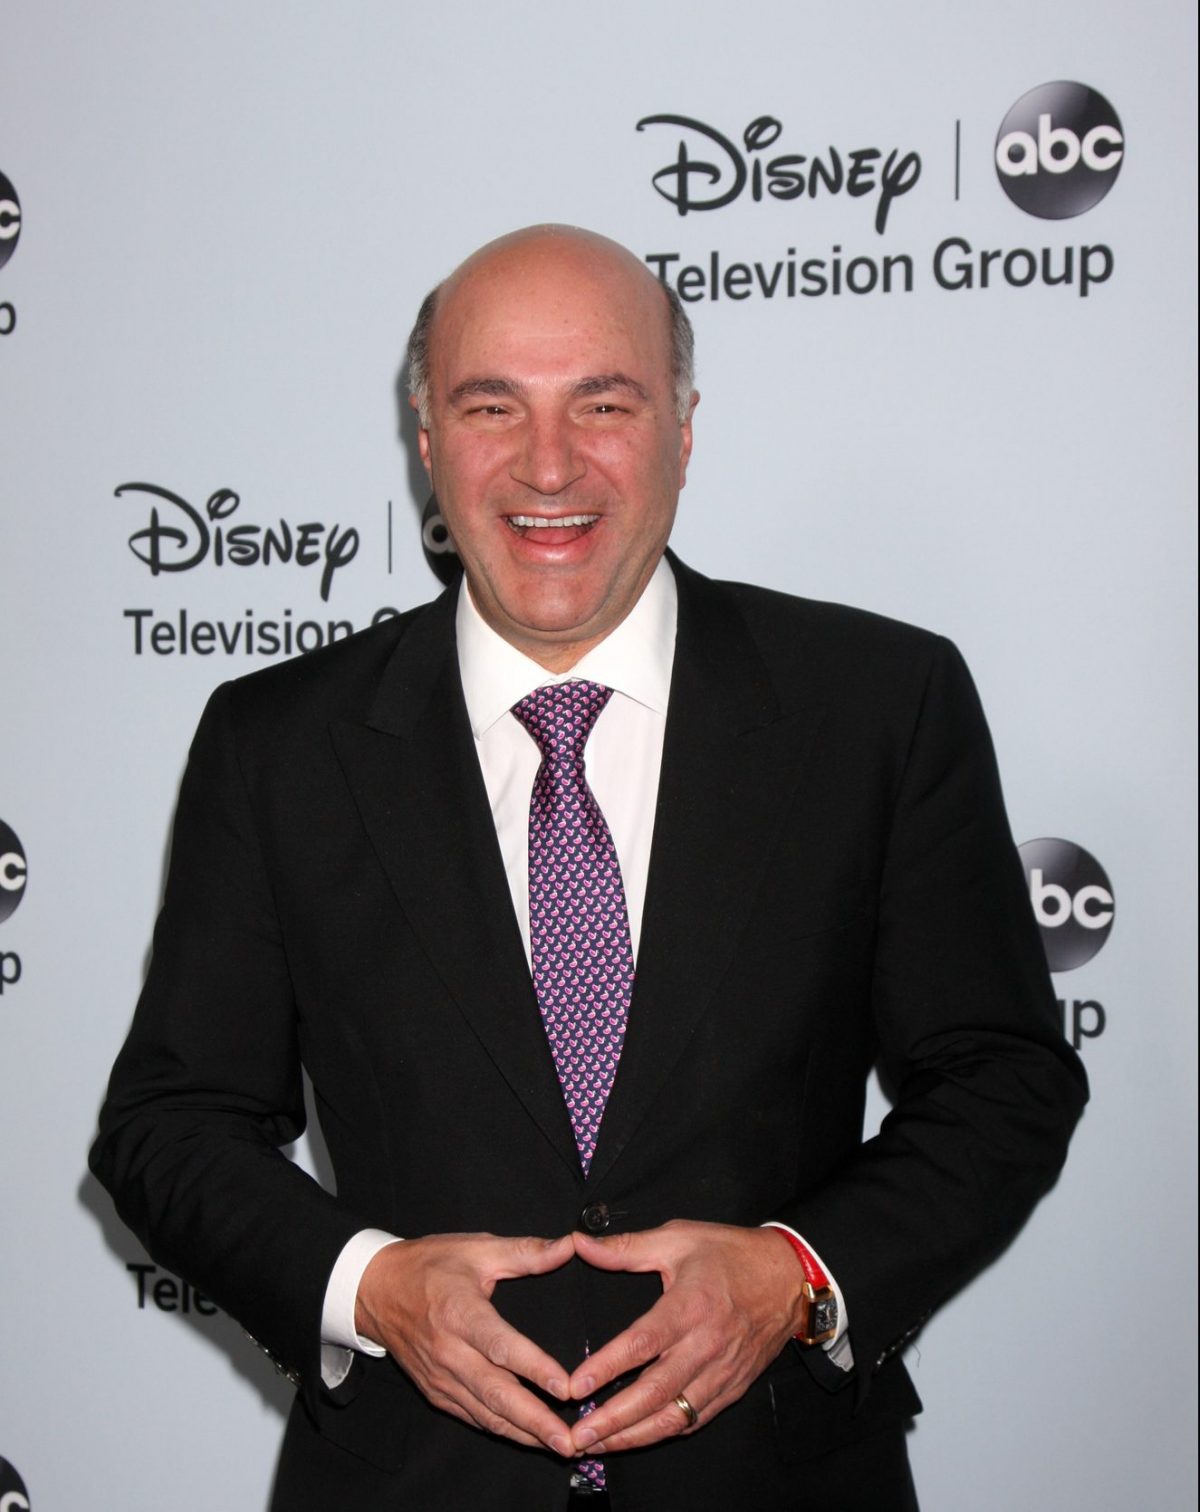 How Did Kevin O'Leary Get Rich? - StartUp Mindset